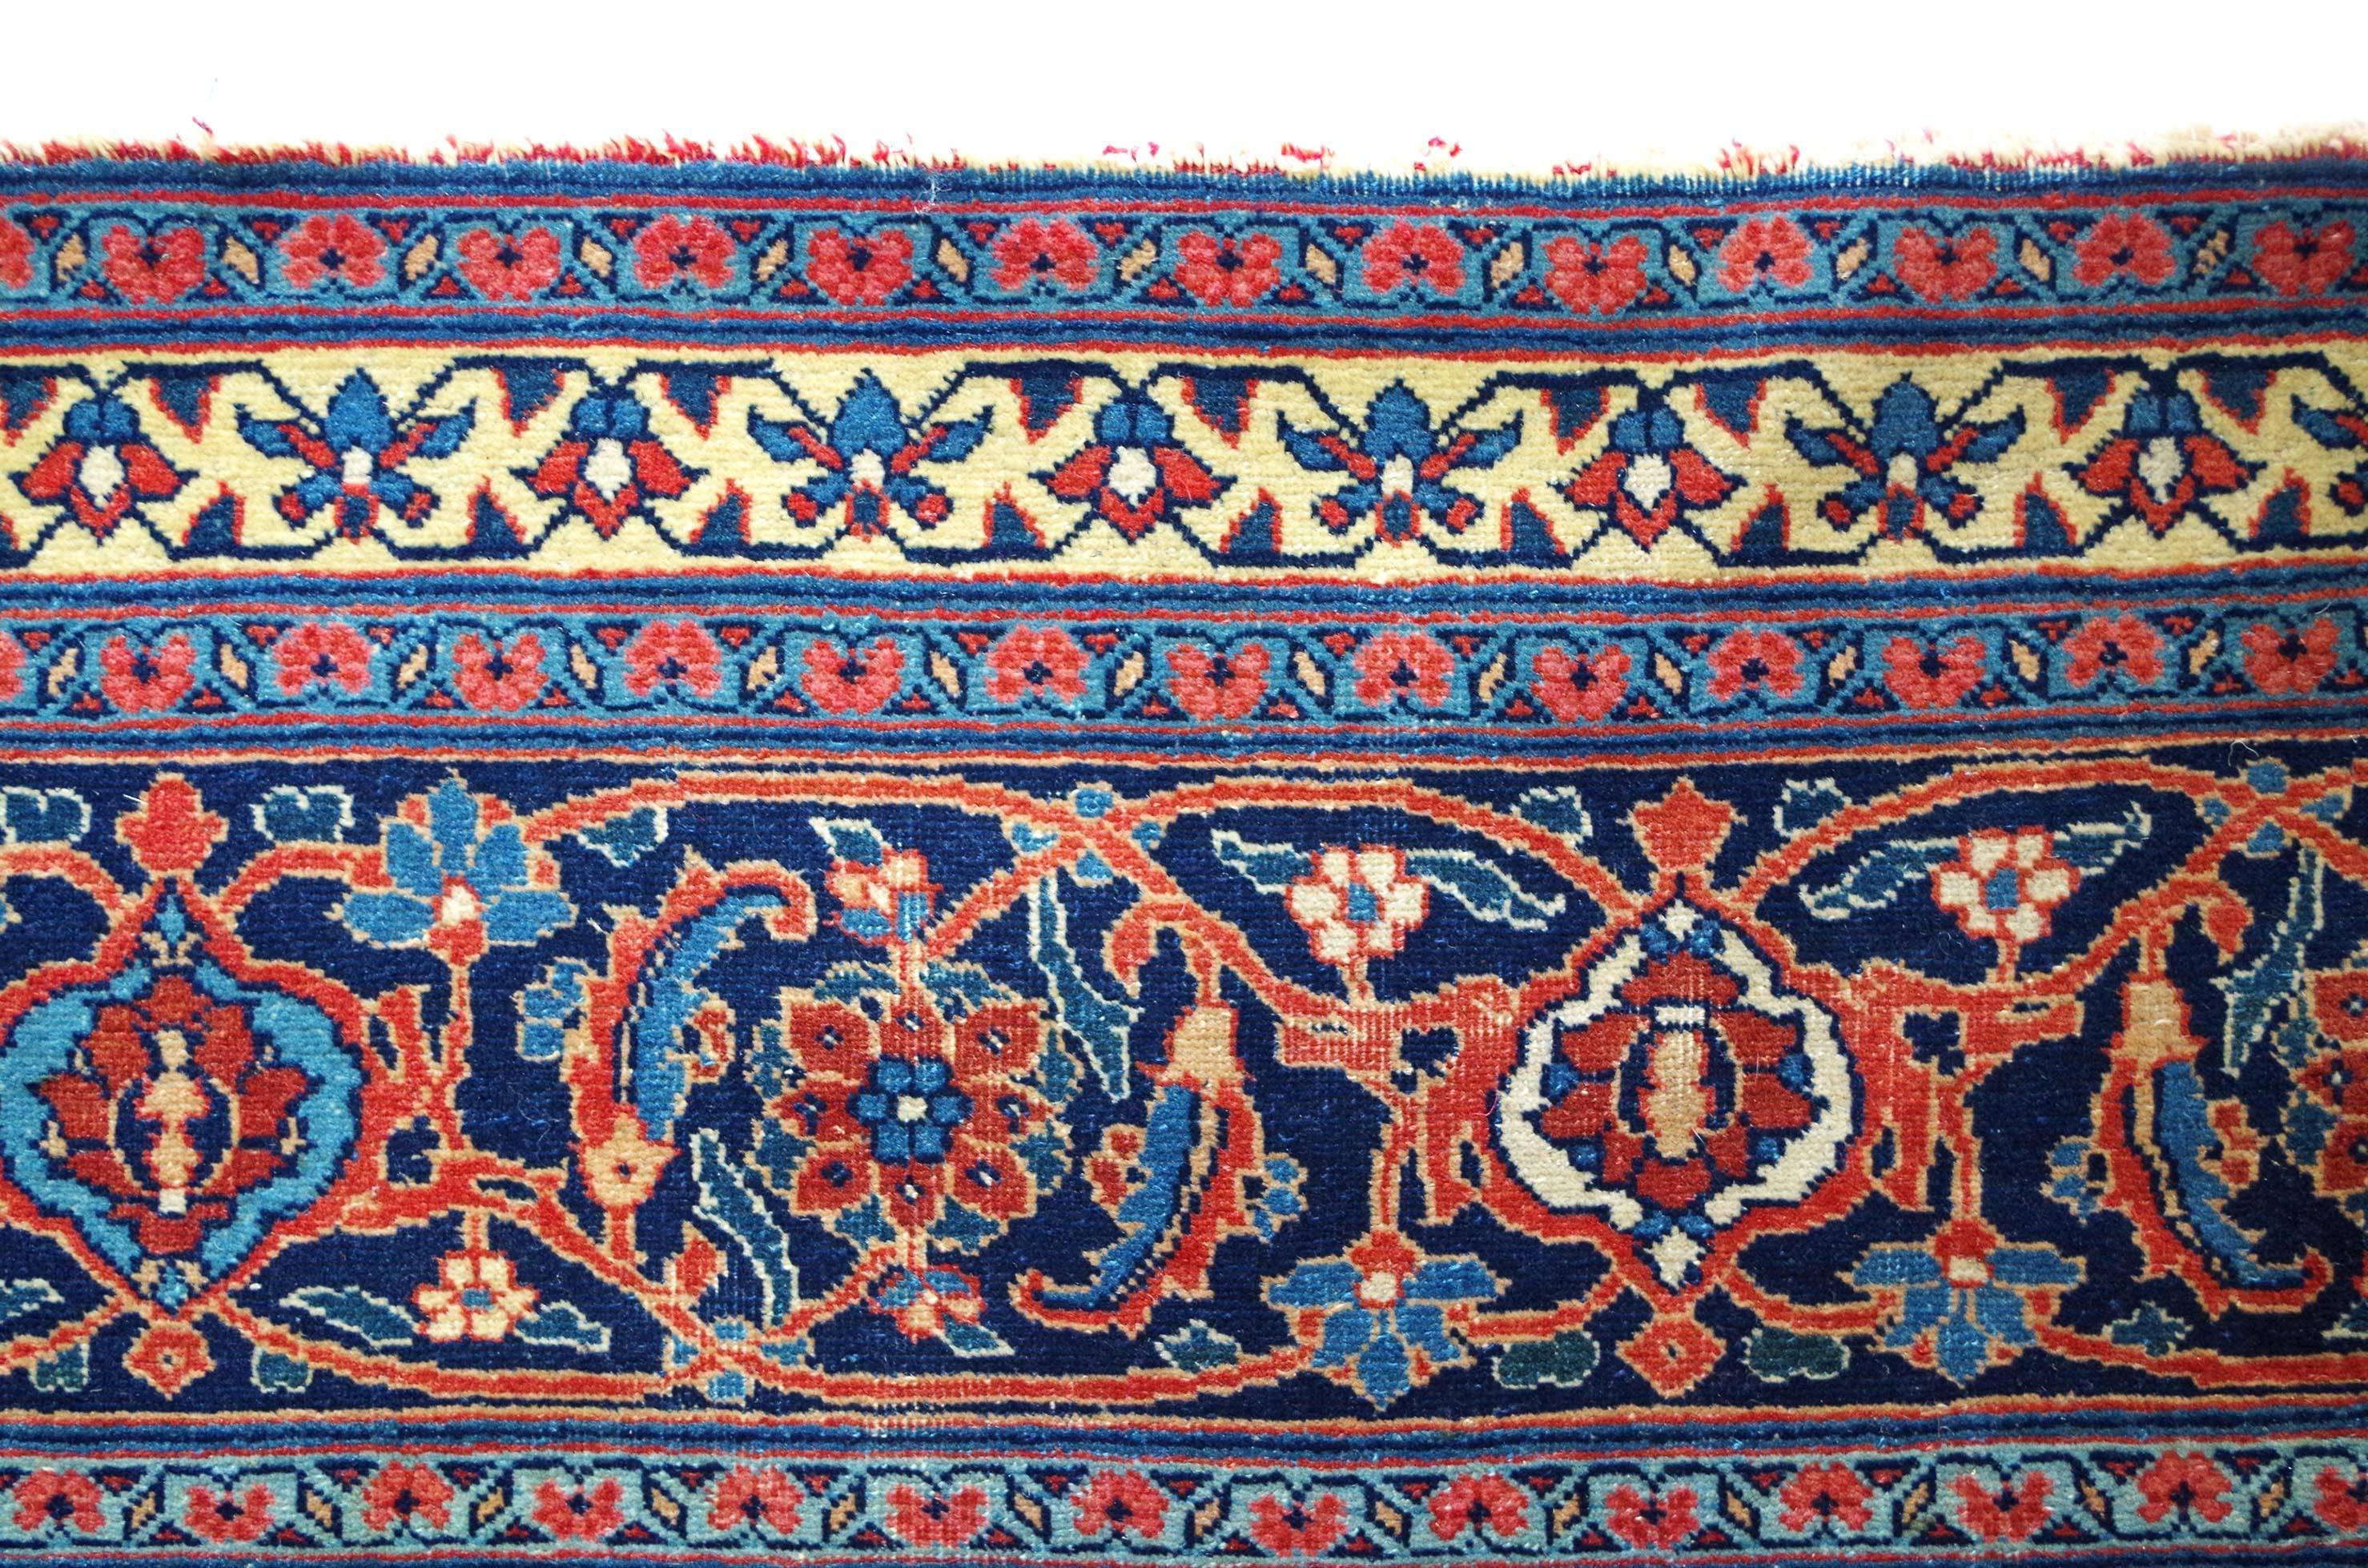 All-over Herati design on a red field. North-West Persia, circa 1910. Cotton warp and weft, woollen pile. Good condition, no repairs.